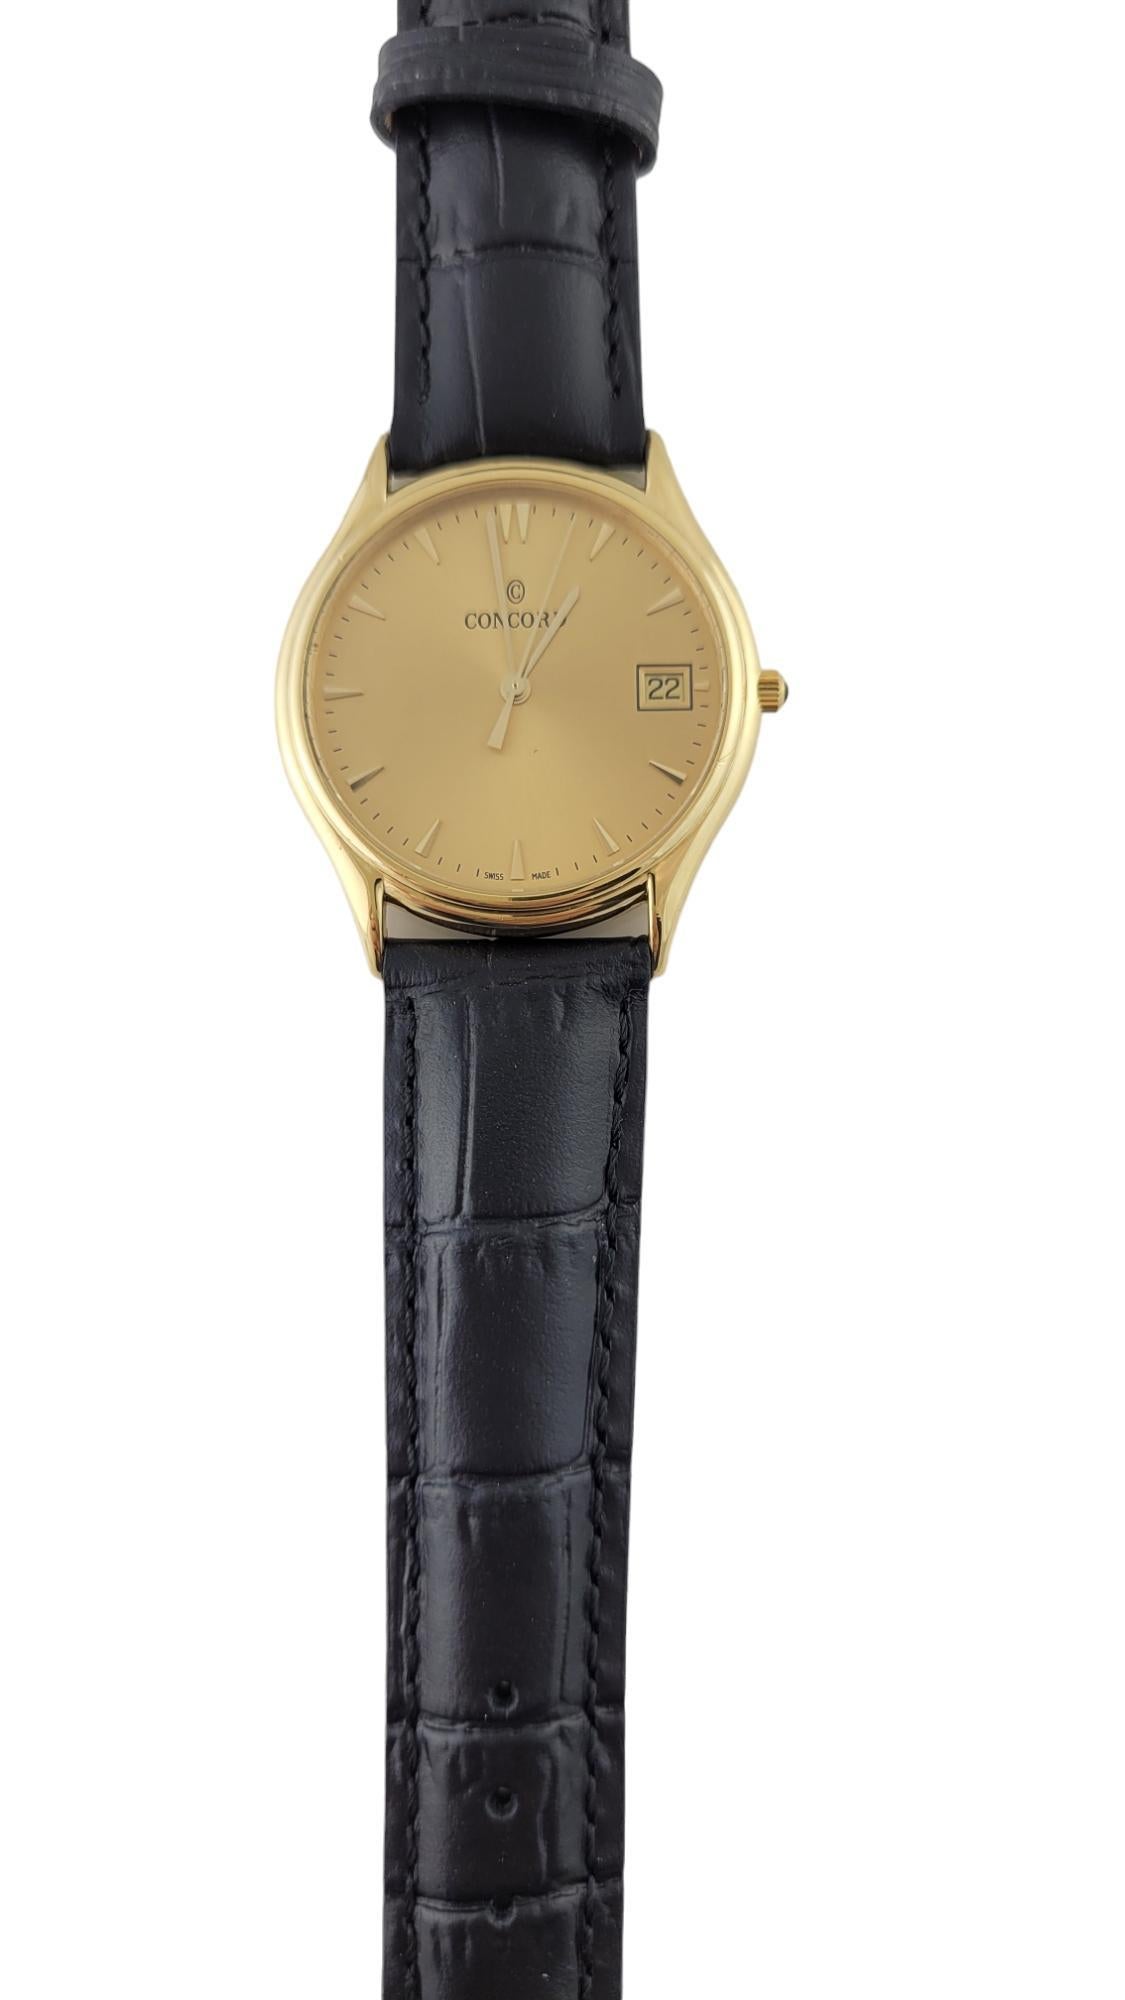 Concord 18K Yellow Gold Classic Men's Watch

Model: 58.78.214
Serial: 1288660

18K yellow gold case - 34mm in diameter, 5mm thick

Gold dial with gold markers and date

New leather band (not concord) - buckle gold plated

10